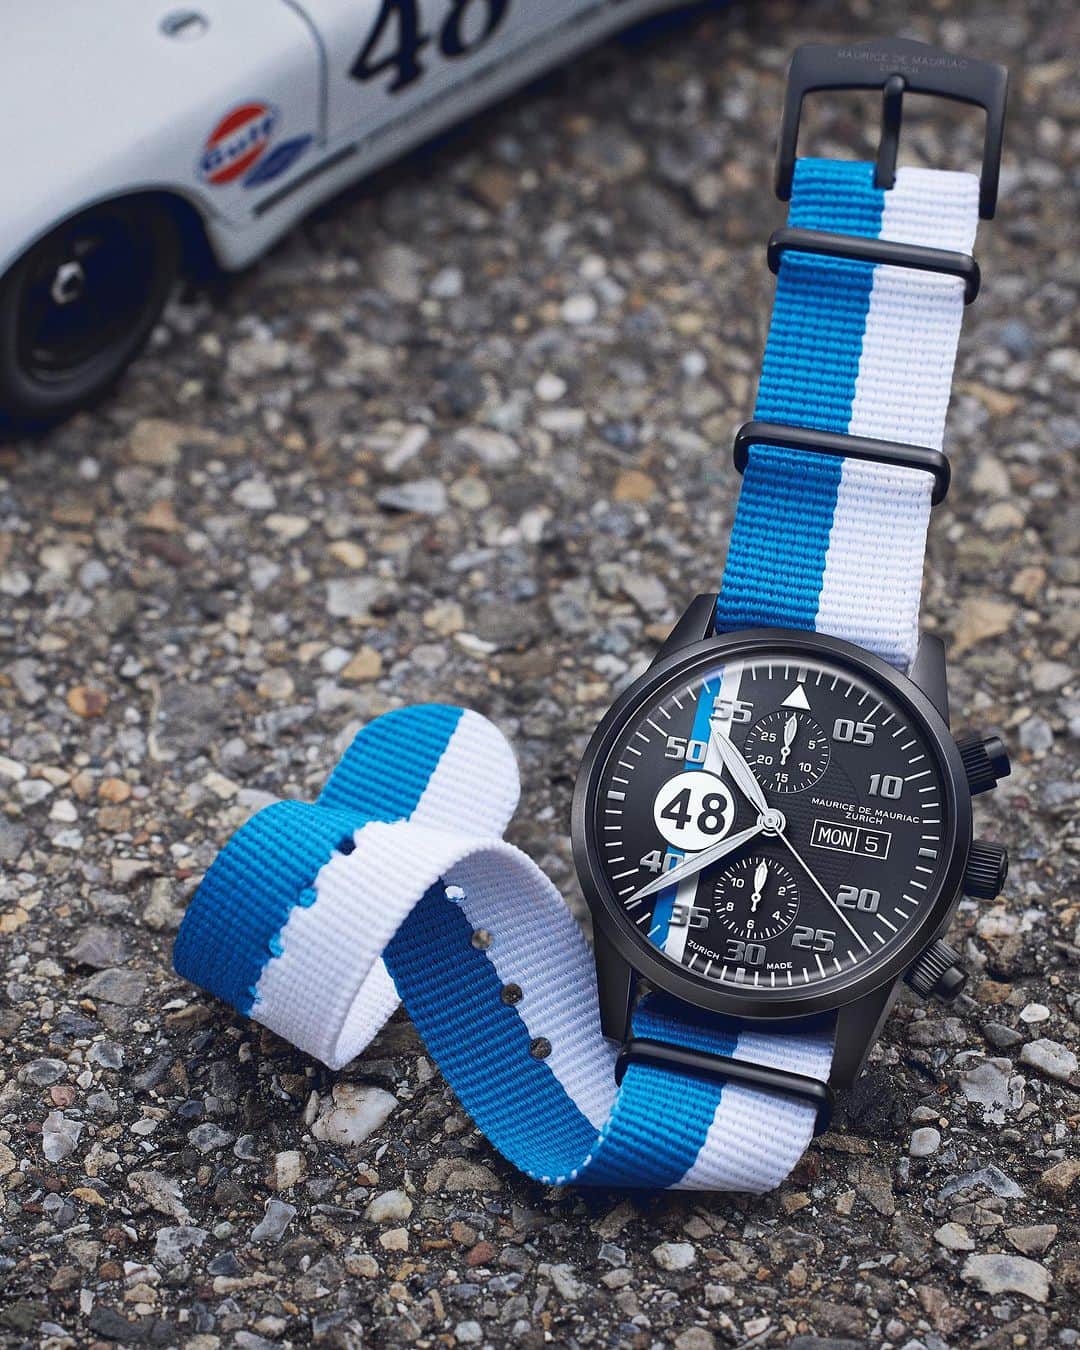 Maurice De Mauriac Zurichのインスタグラム：「Drive along with the new Grand Prix Zurich 🏁💙🤍  We celebrates motor-racing iconography with our hometown colors - the new customizable Chrono Modern Grand Prix Zurich. This new watch embodies the principles of timeless design and superior performance. The Chrono Modern Grand Prix Zurich is destined to become a must-have accessory for watch enthusiasts.  #MauriceDeMauriac #MDM #GrandPrixZurich #GP #GPZurich #GrandPrix #Racing #zurich #drivethrough #city #race #cars」